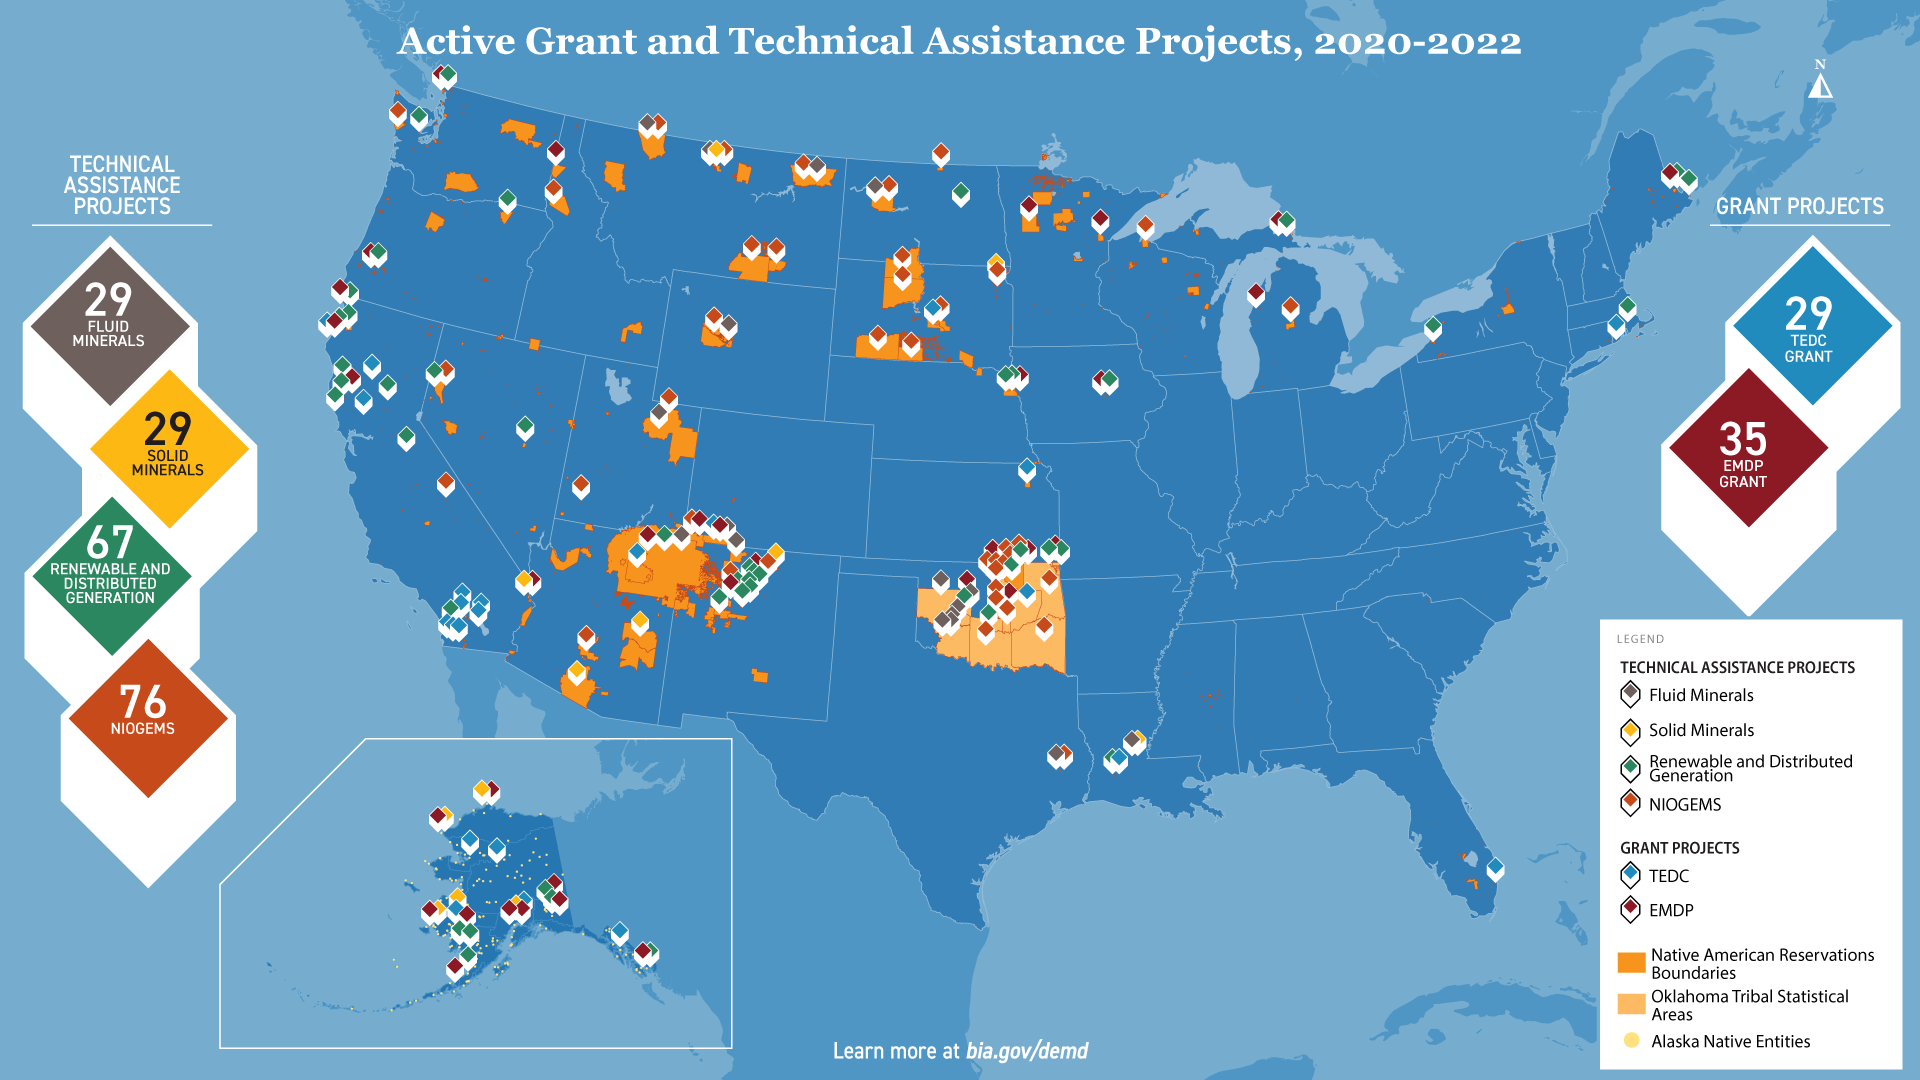 2020-2022 Active Grants and Technical Assistance Projects